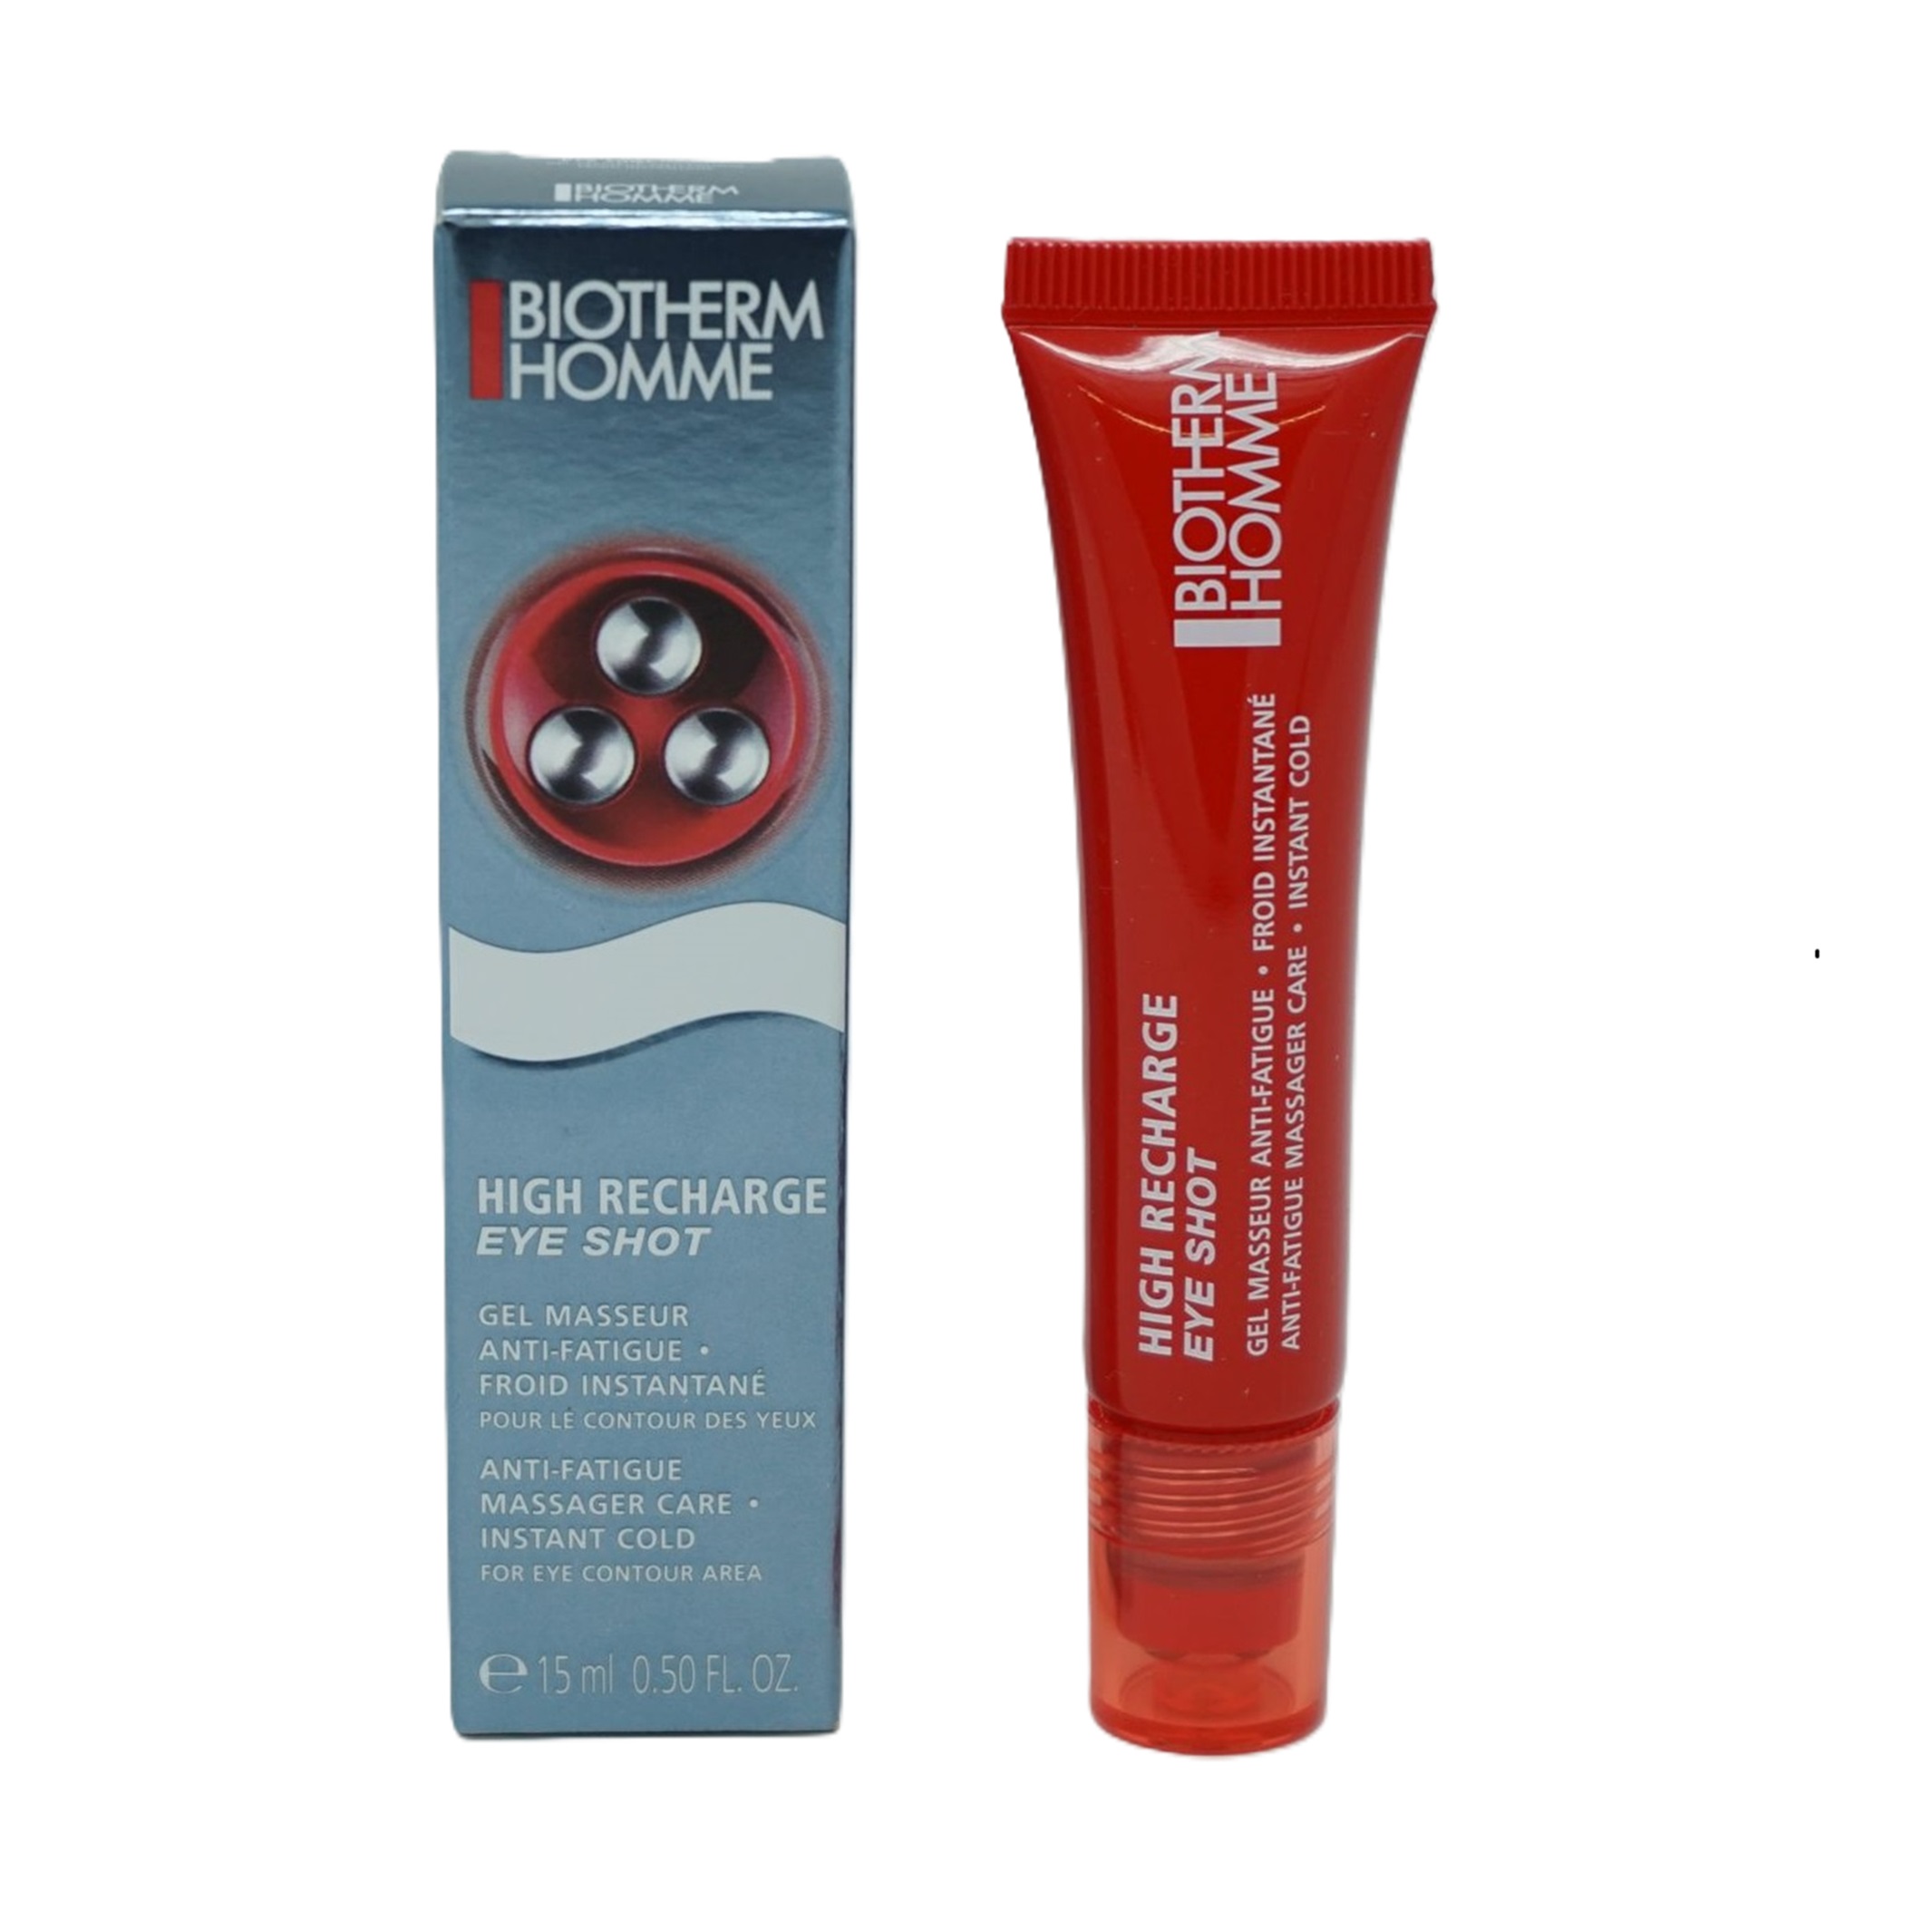 Biotherm Homme High Recharge Eye Shot 15ml